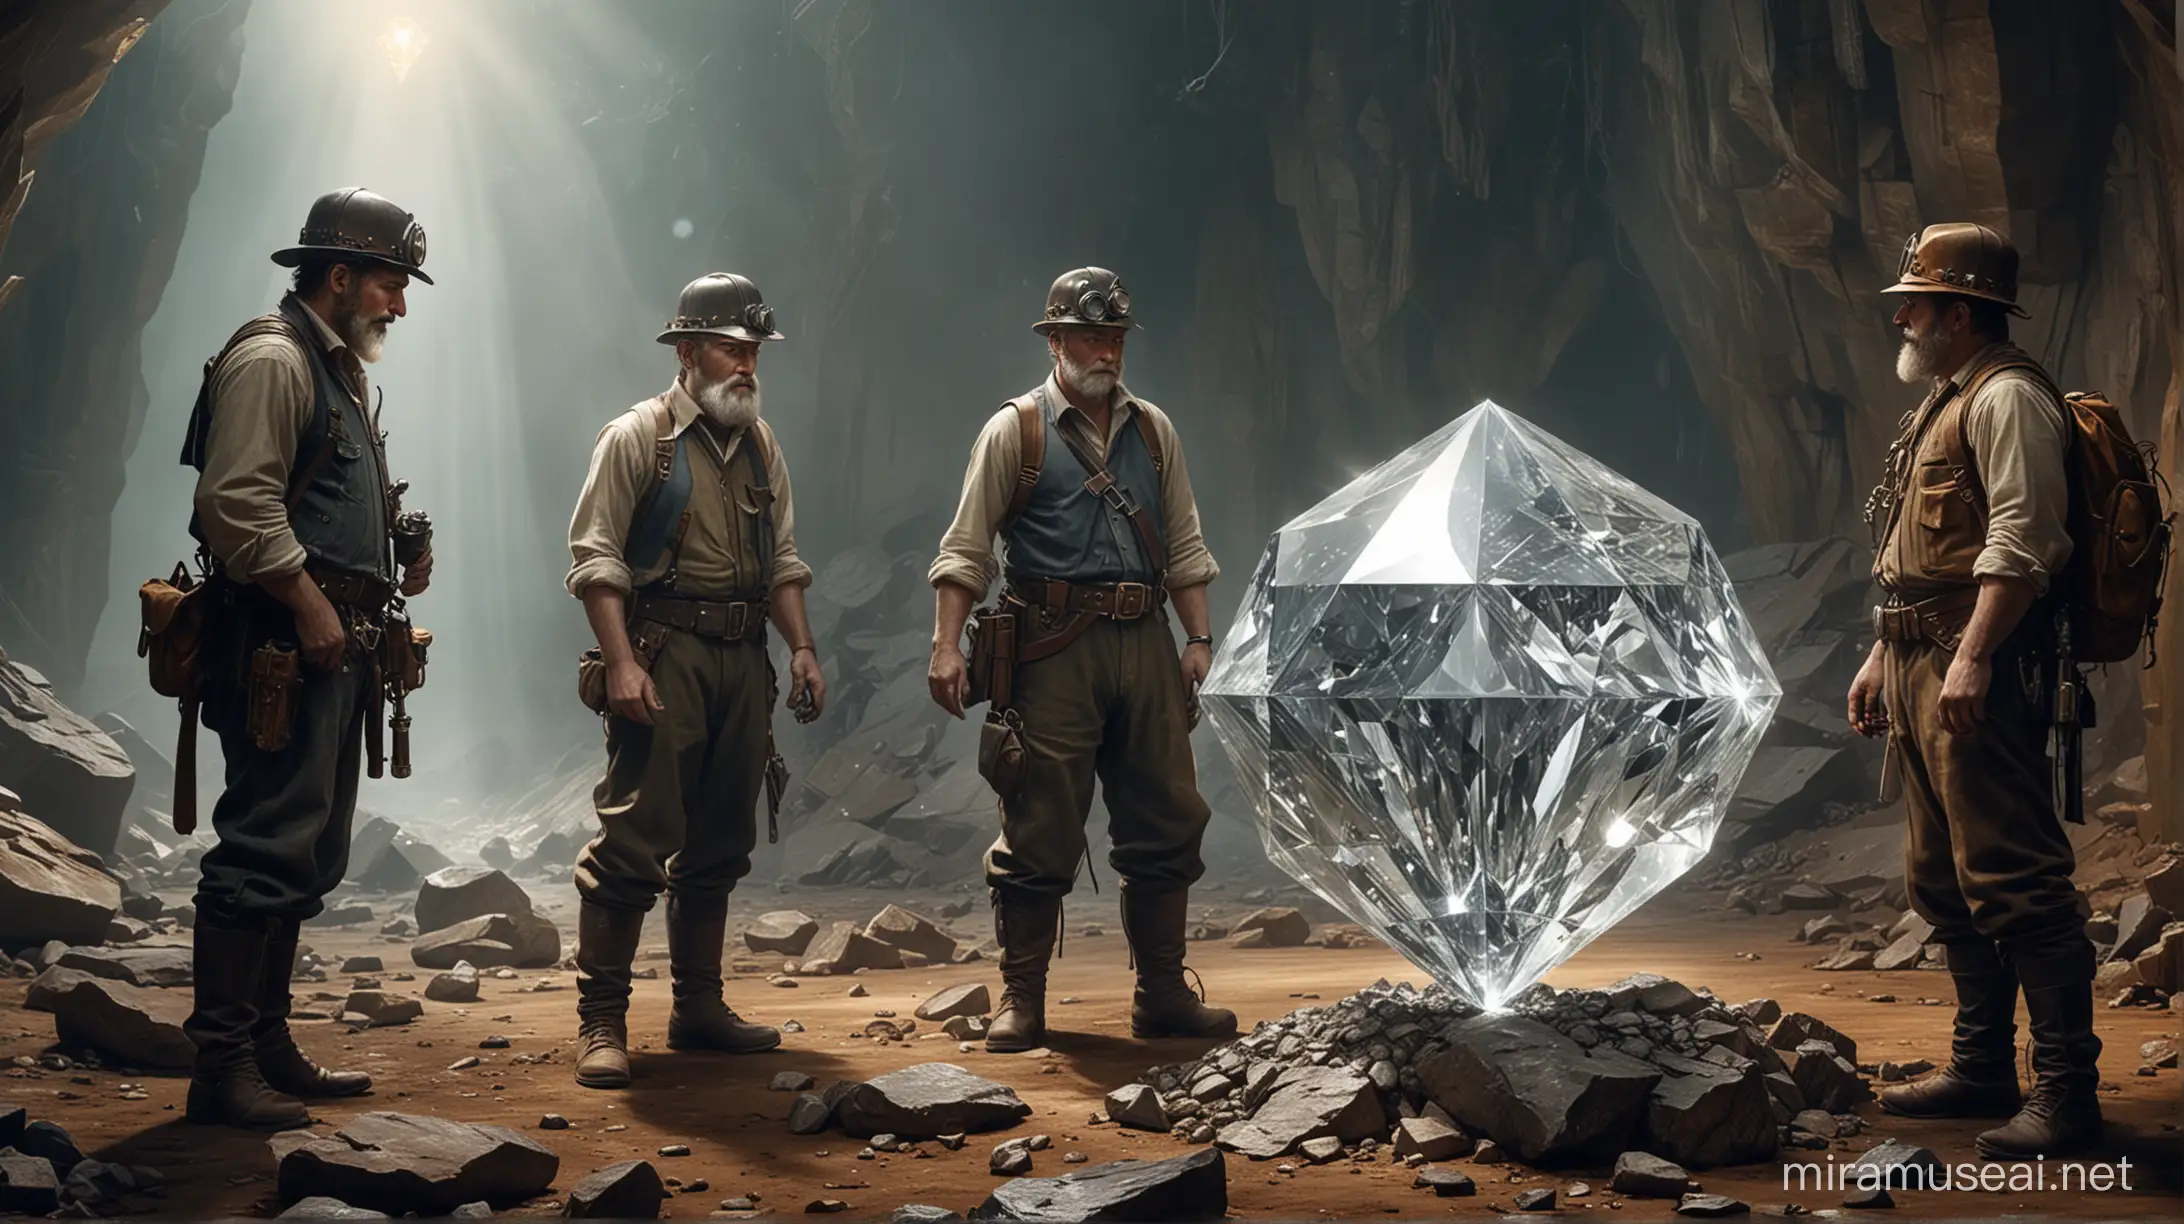 Steampunk miners look at a very big shining diamond, which has been found in a steampunk diamond mine